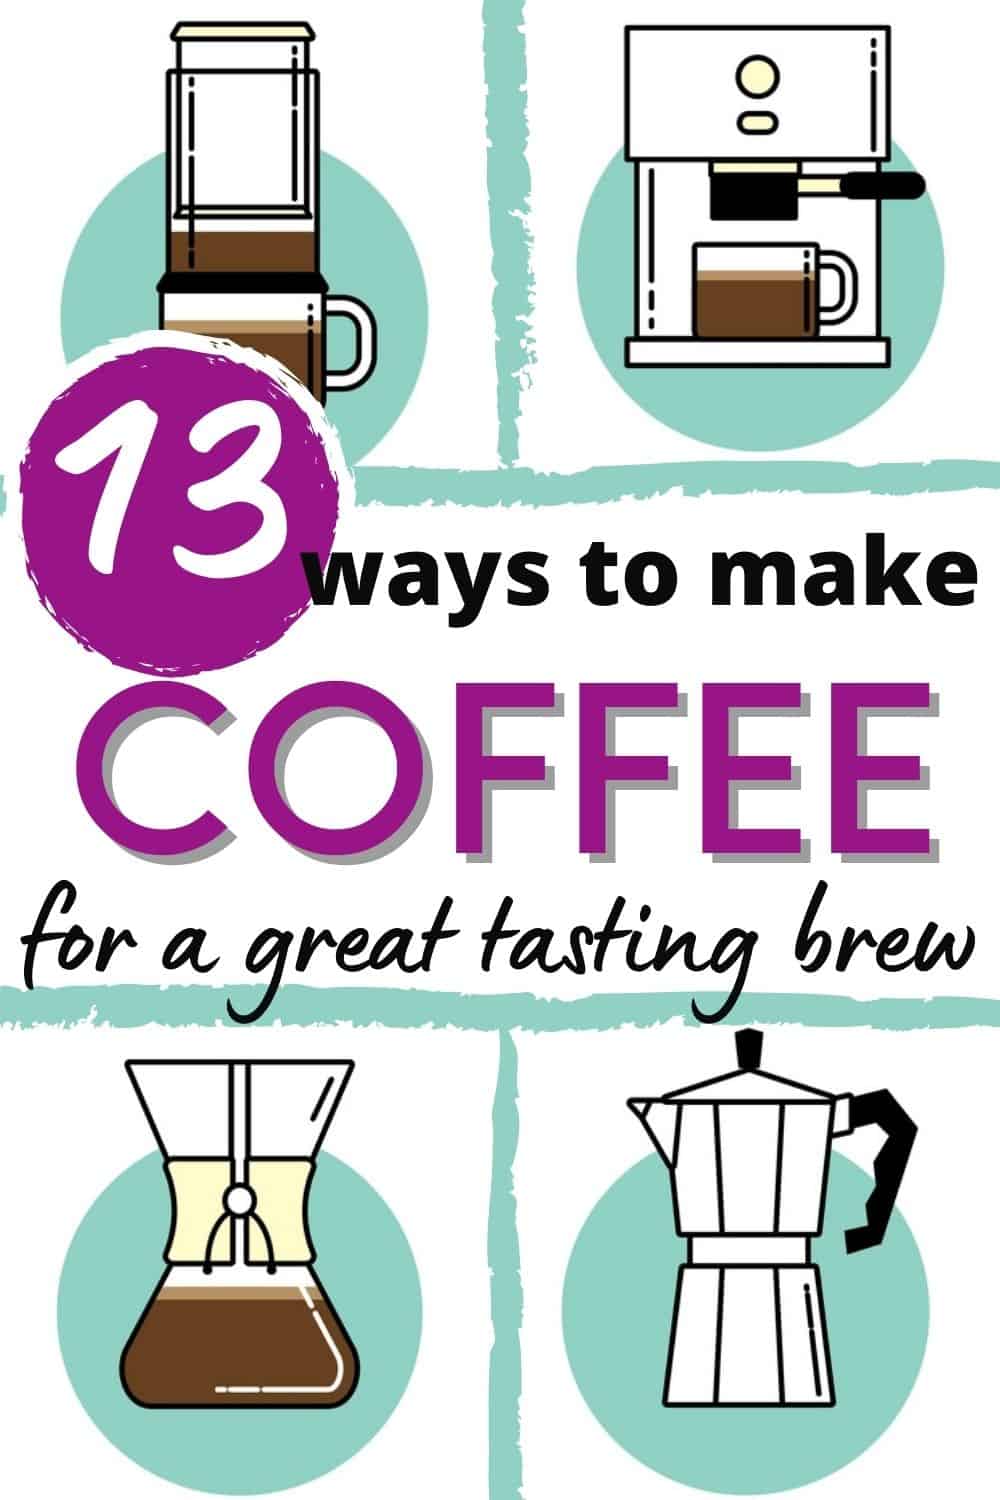 images of coffee machine icons with text 13 ways to make coffee